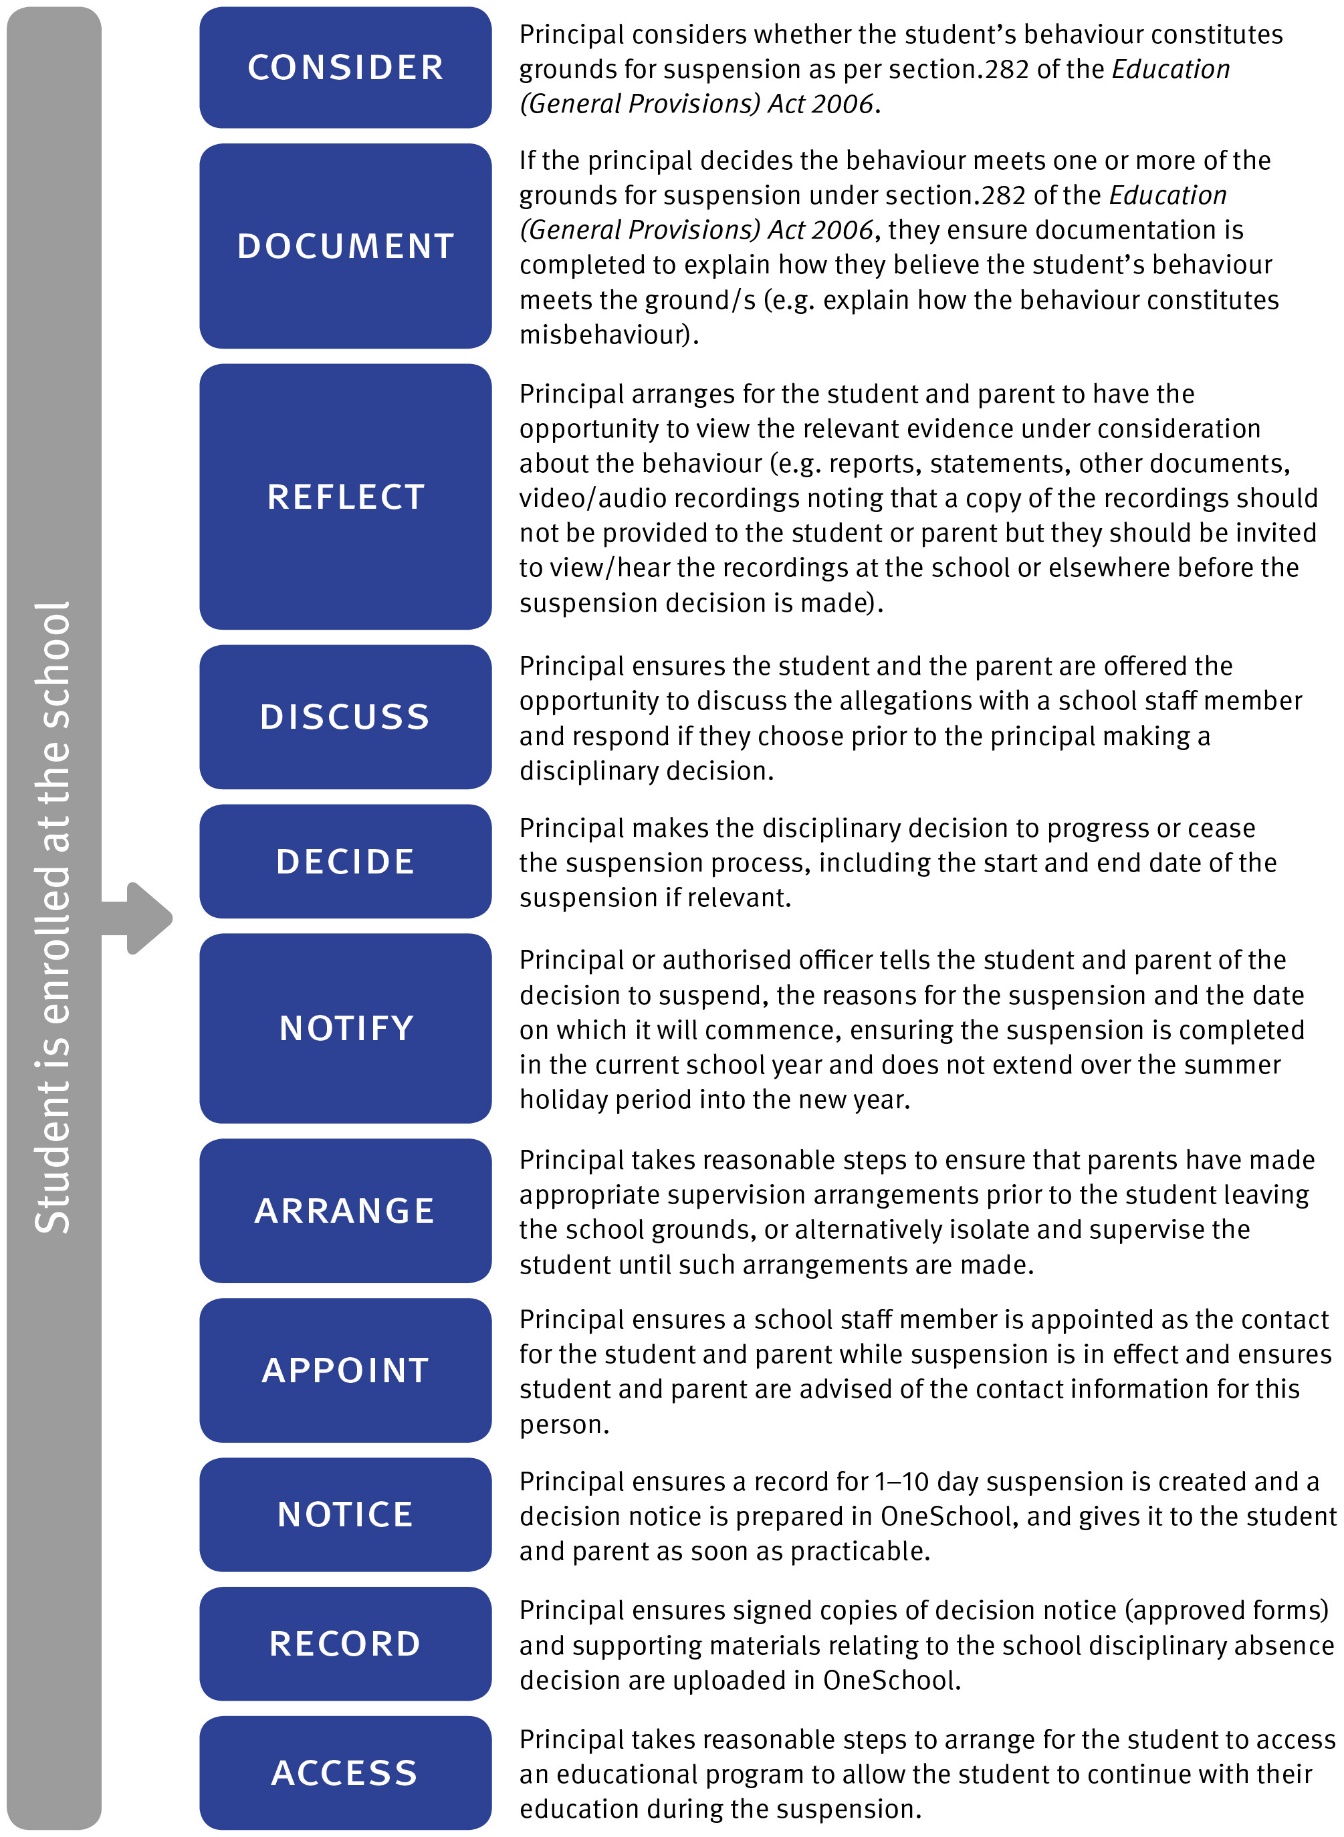 Flowchart showing steps for Principal to process suspensions of 1-10 days where a student is enrolled at the school as: 1. Consider  2. Document 3. Reflect 4. Discuss 5. Decide 6. Notify 7. Arrange 8. Appoint 9. Notice 10. Record 11. Access